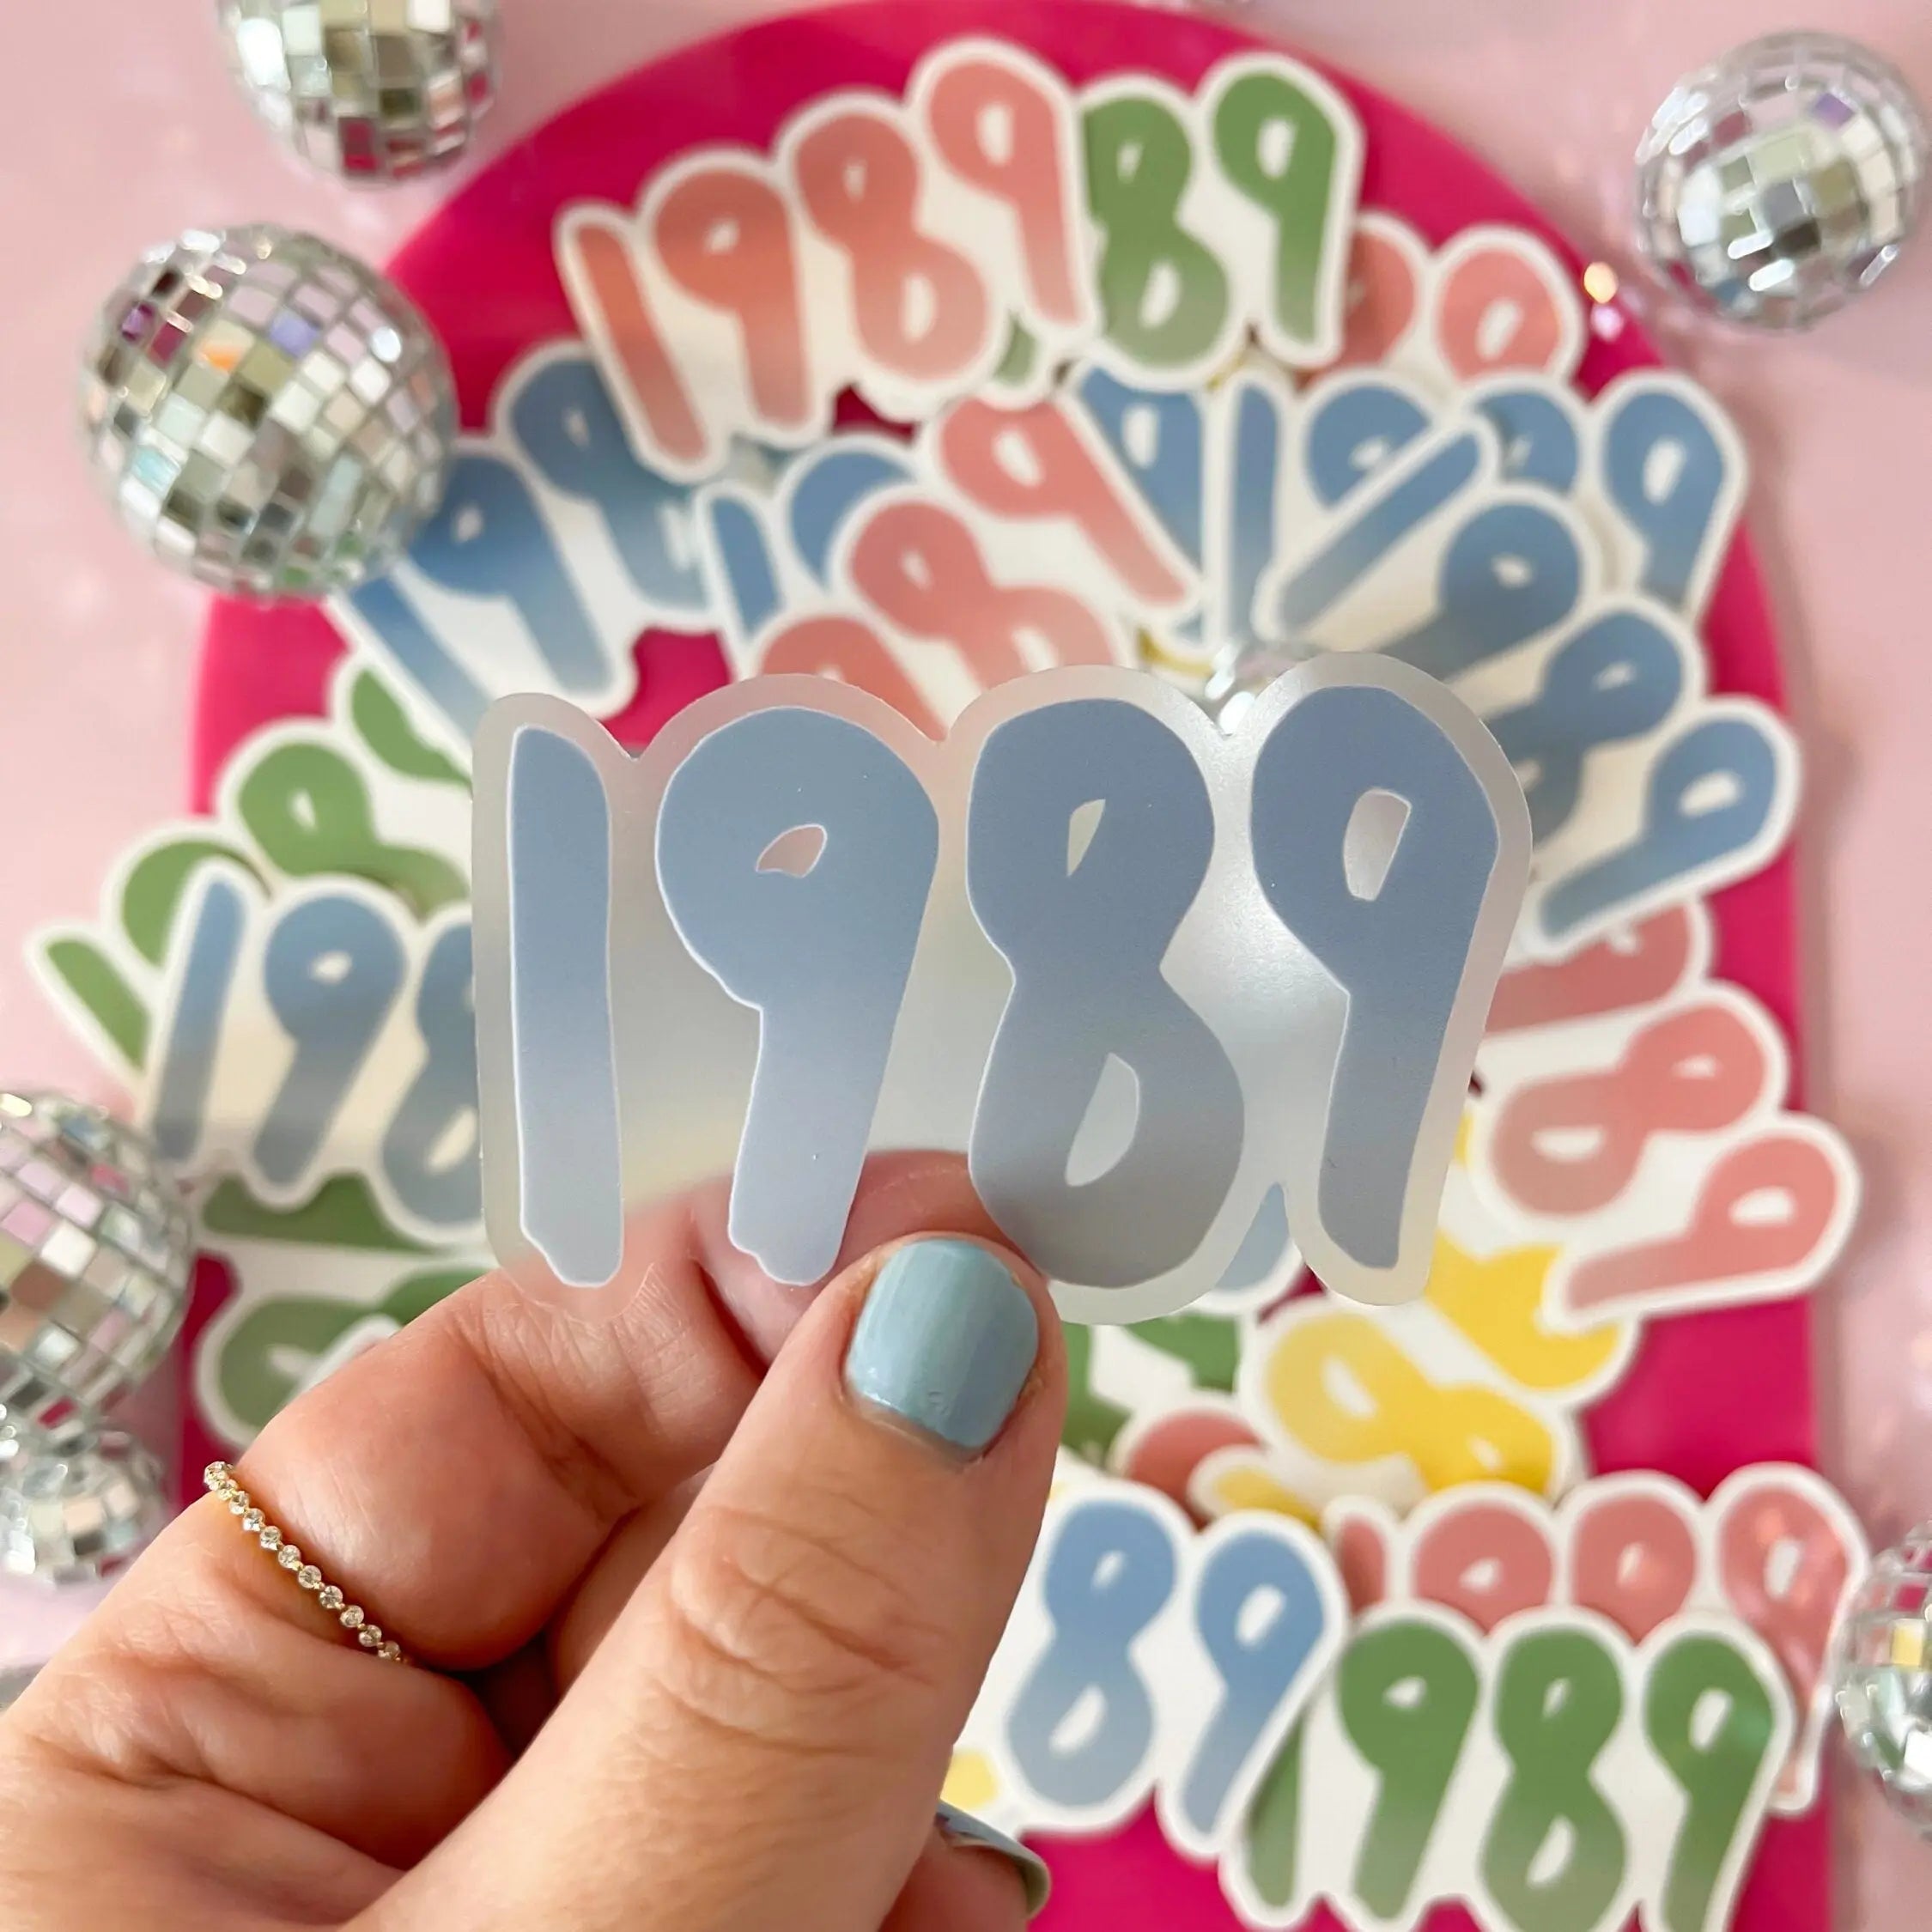 CLEAR 1989 sticker - blue MangoIllustrated